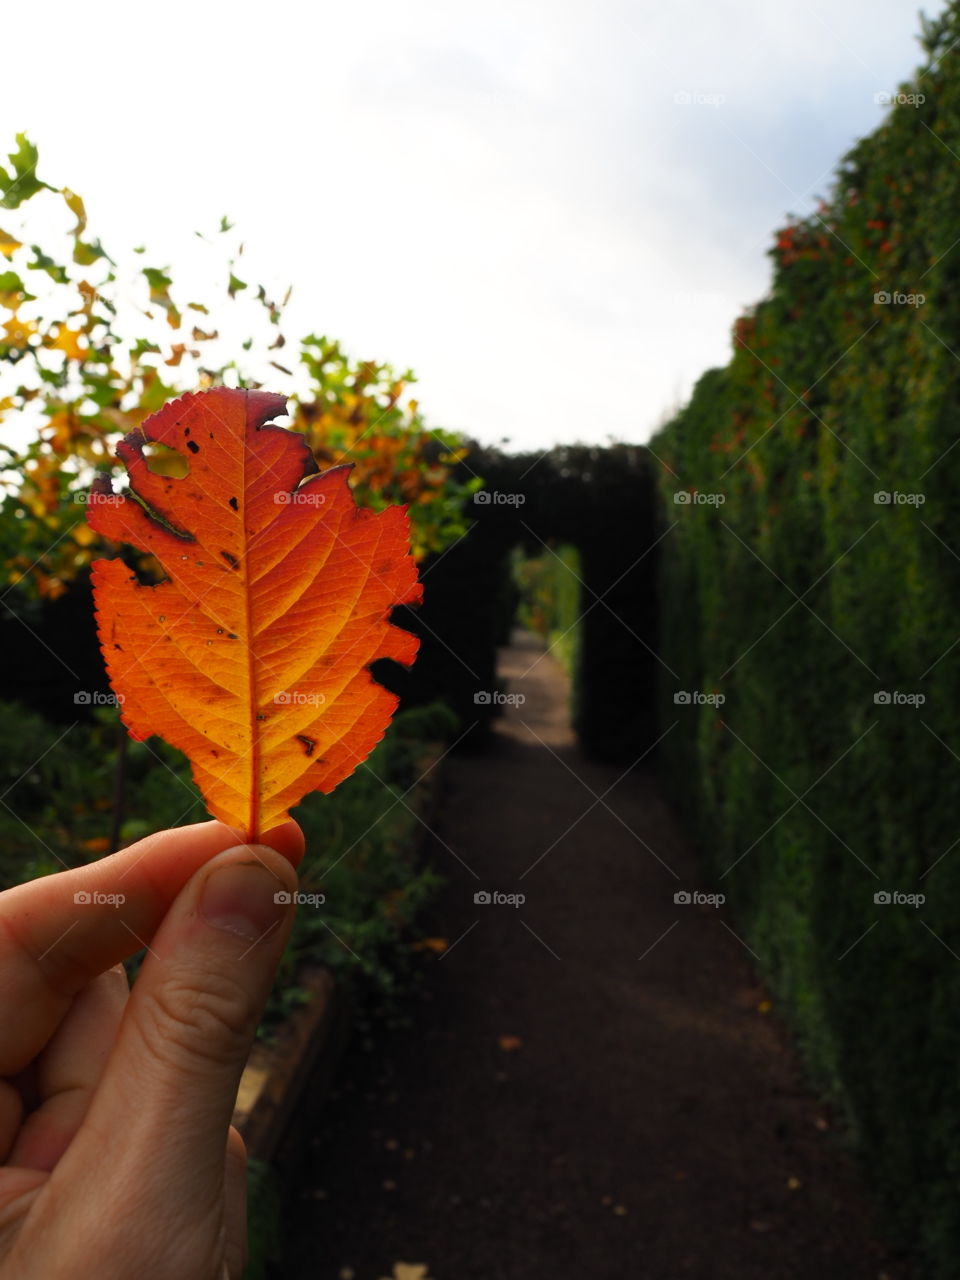 Outdoors, Tree, No Person, Fall, Leaf